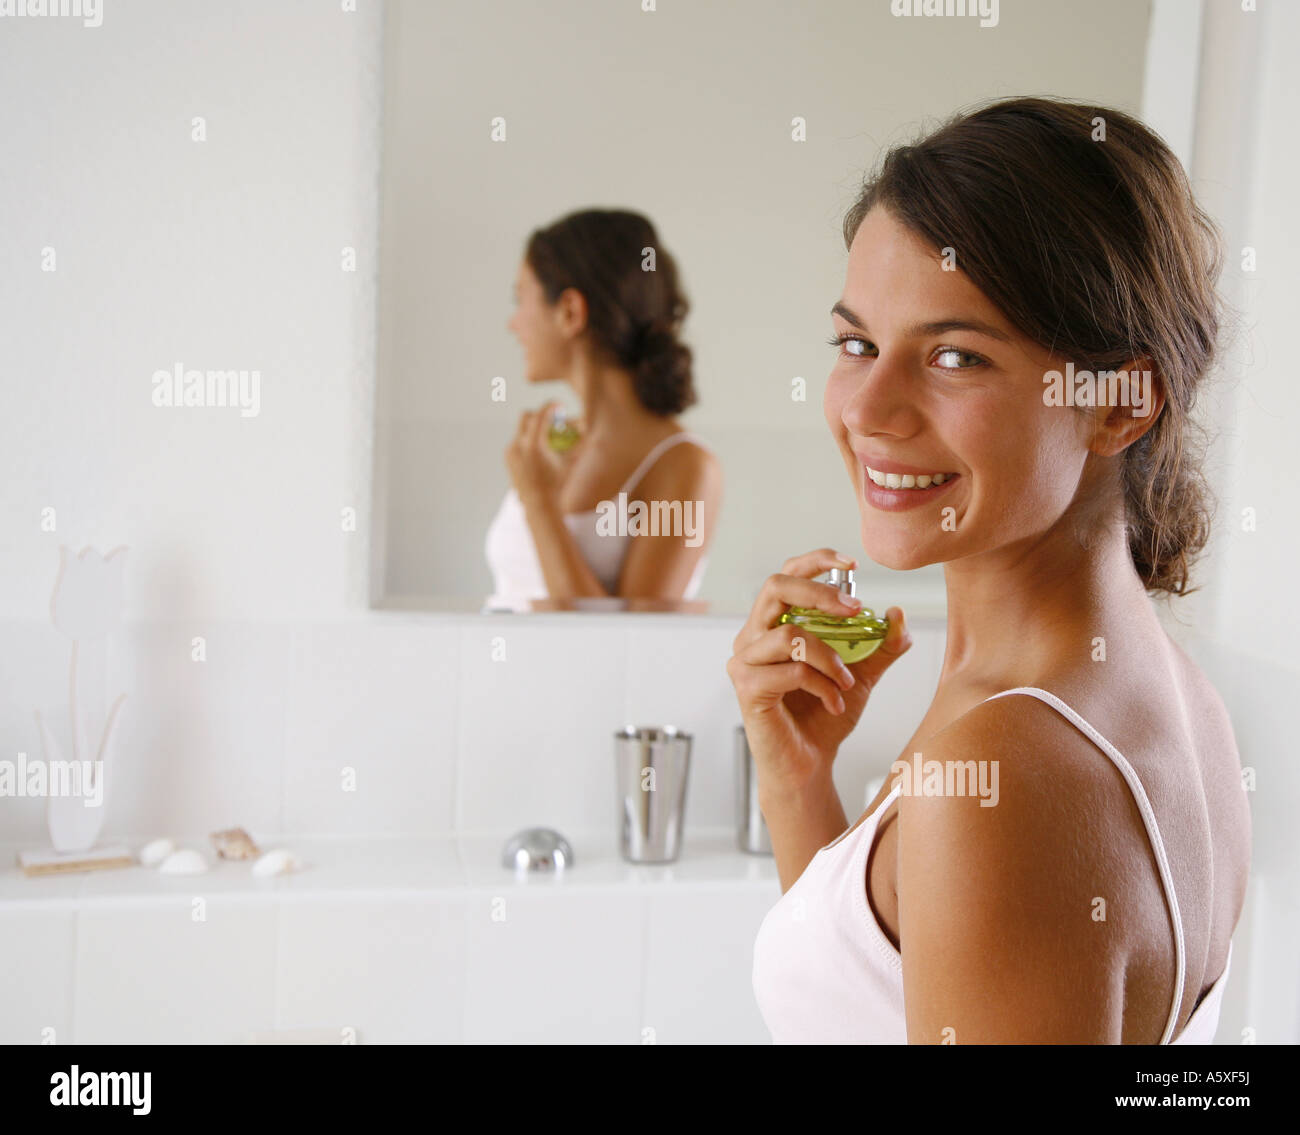 Young woman holding perfume bottle close up portrait Stock Photo